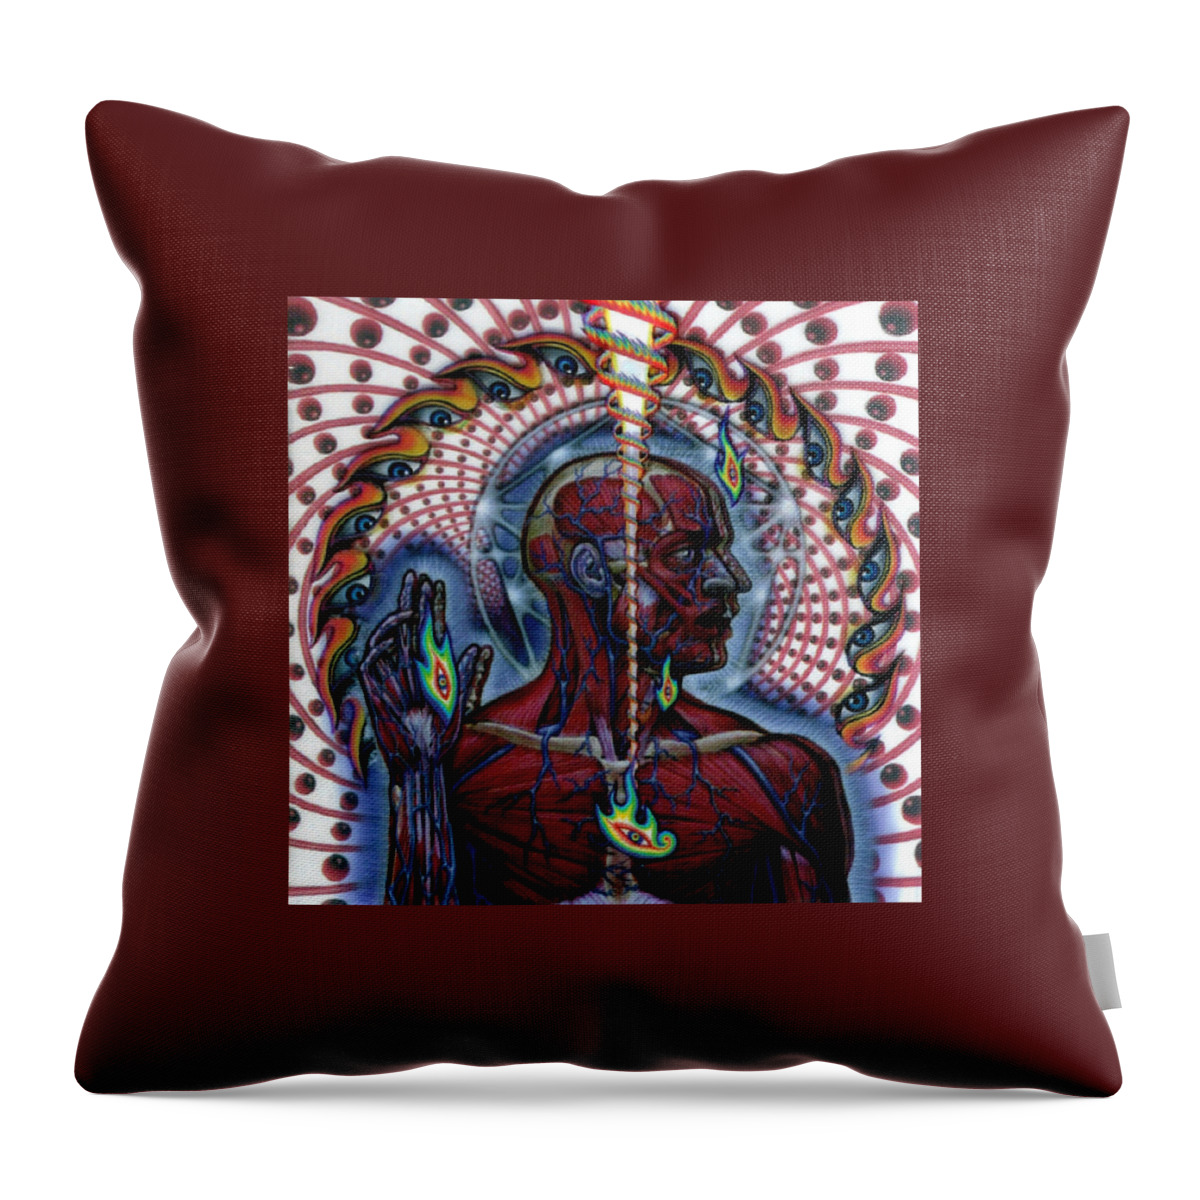 Tool Throw Pillow featuring the digital art Tool by Maye Loeser